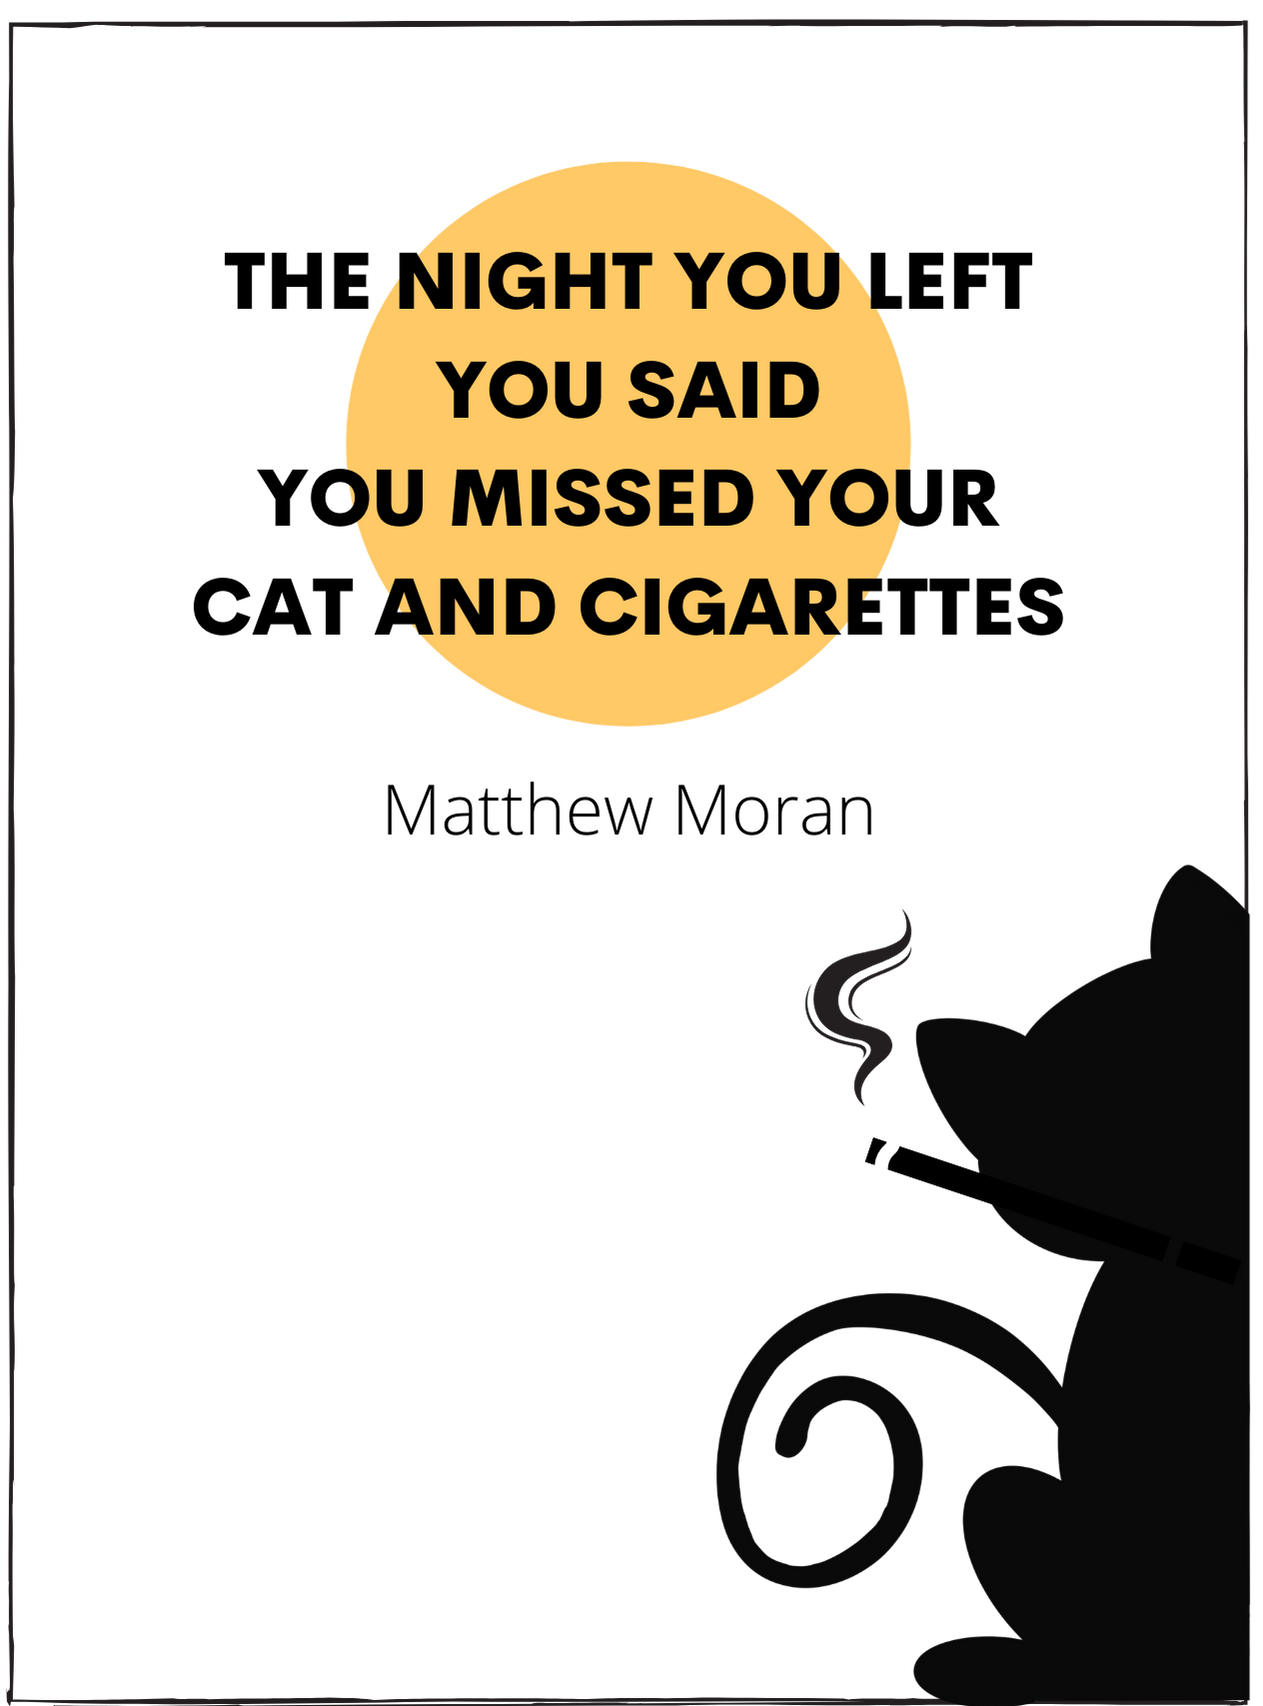 Image of a t-shirt design with some song lyrics and a line art of a cat smoking a cigarette